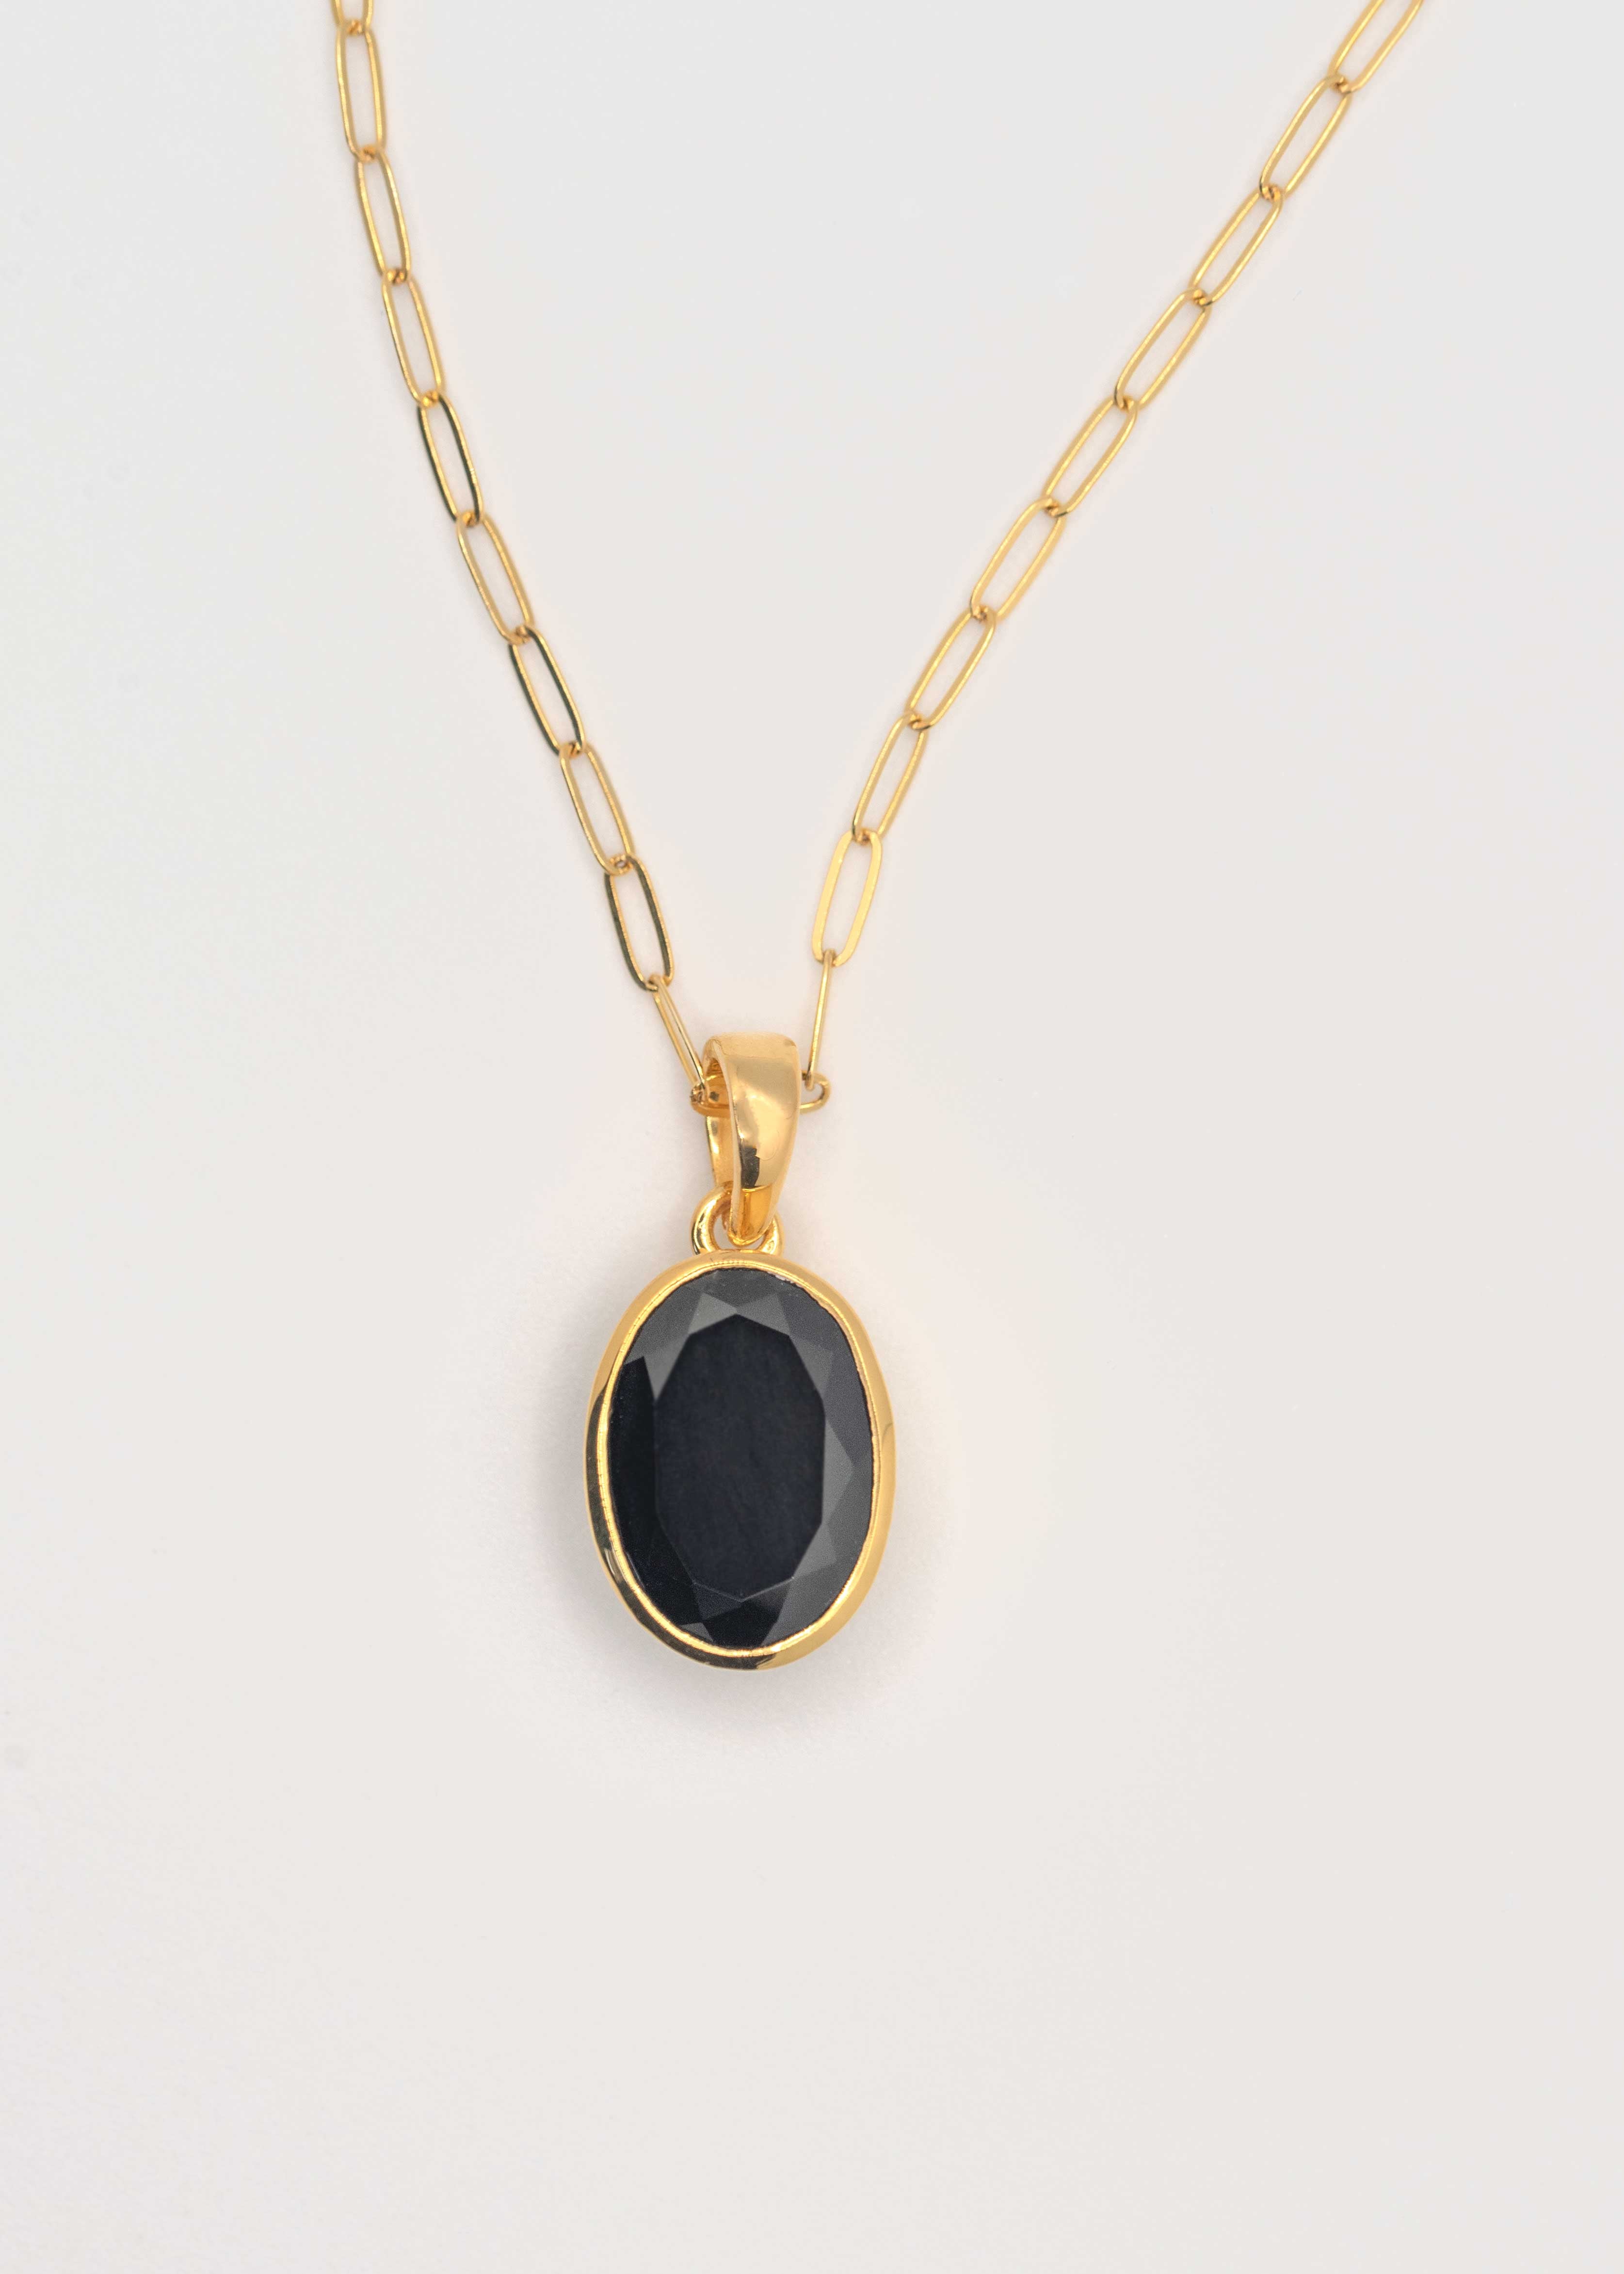 Black Onyx Pendant Necklace oval women's gifts gold